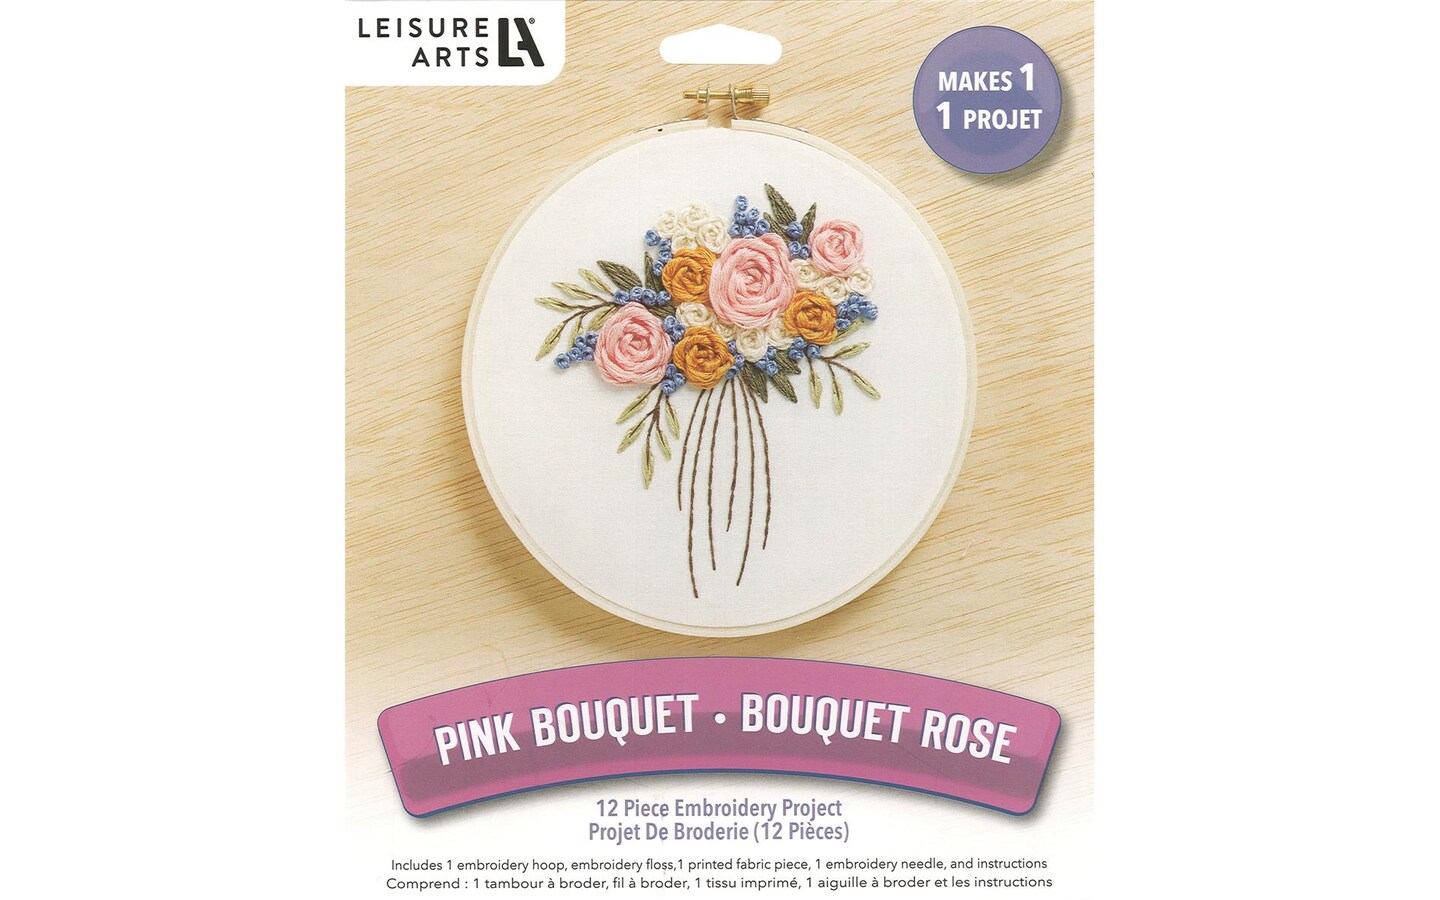 Colorful Flower Embroidery Kits for Beginners Embroidery Pattern